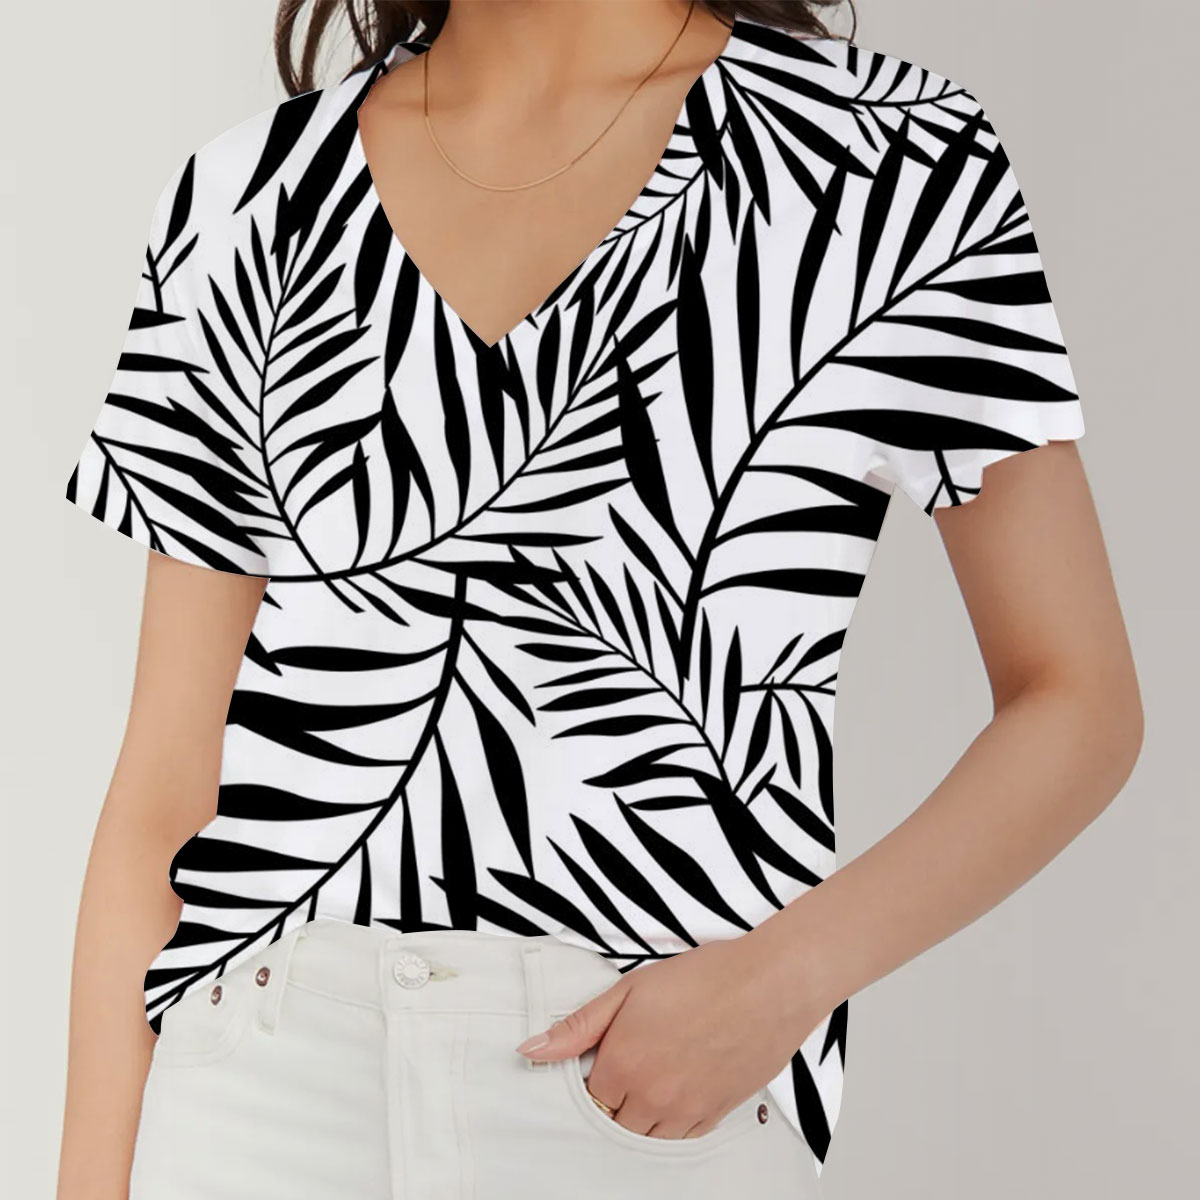 Black And White With Palm Leaves V-Neck Women's T-Shirt